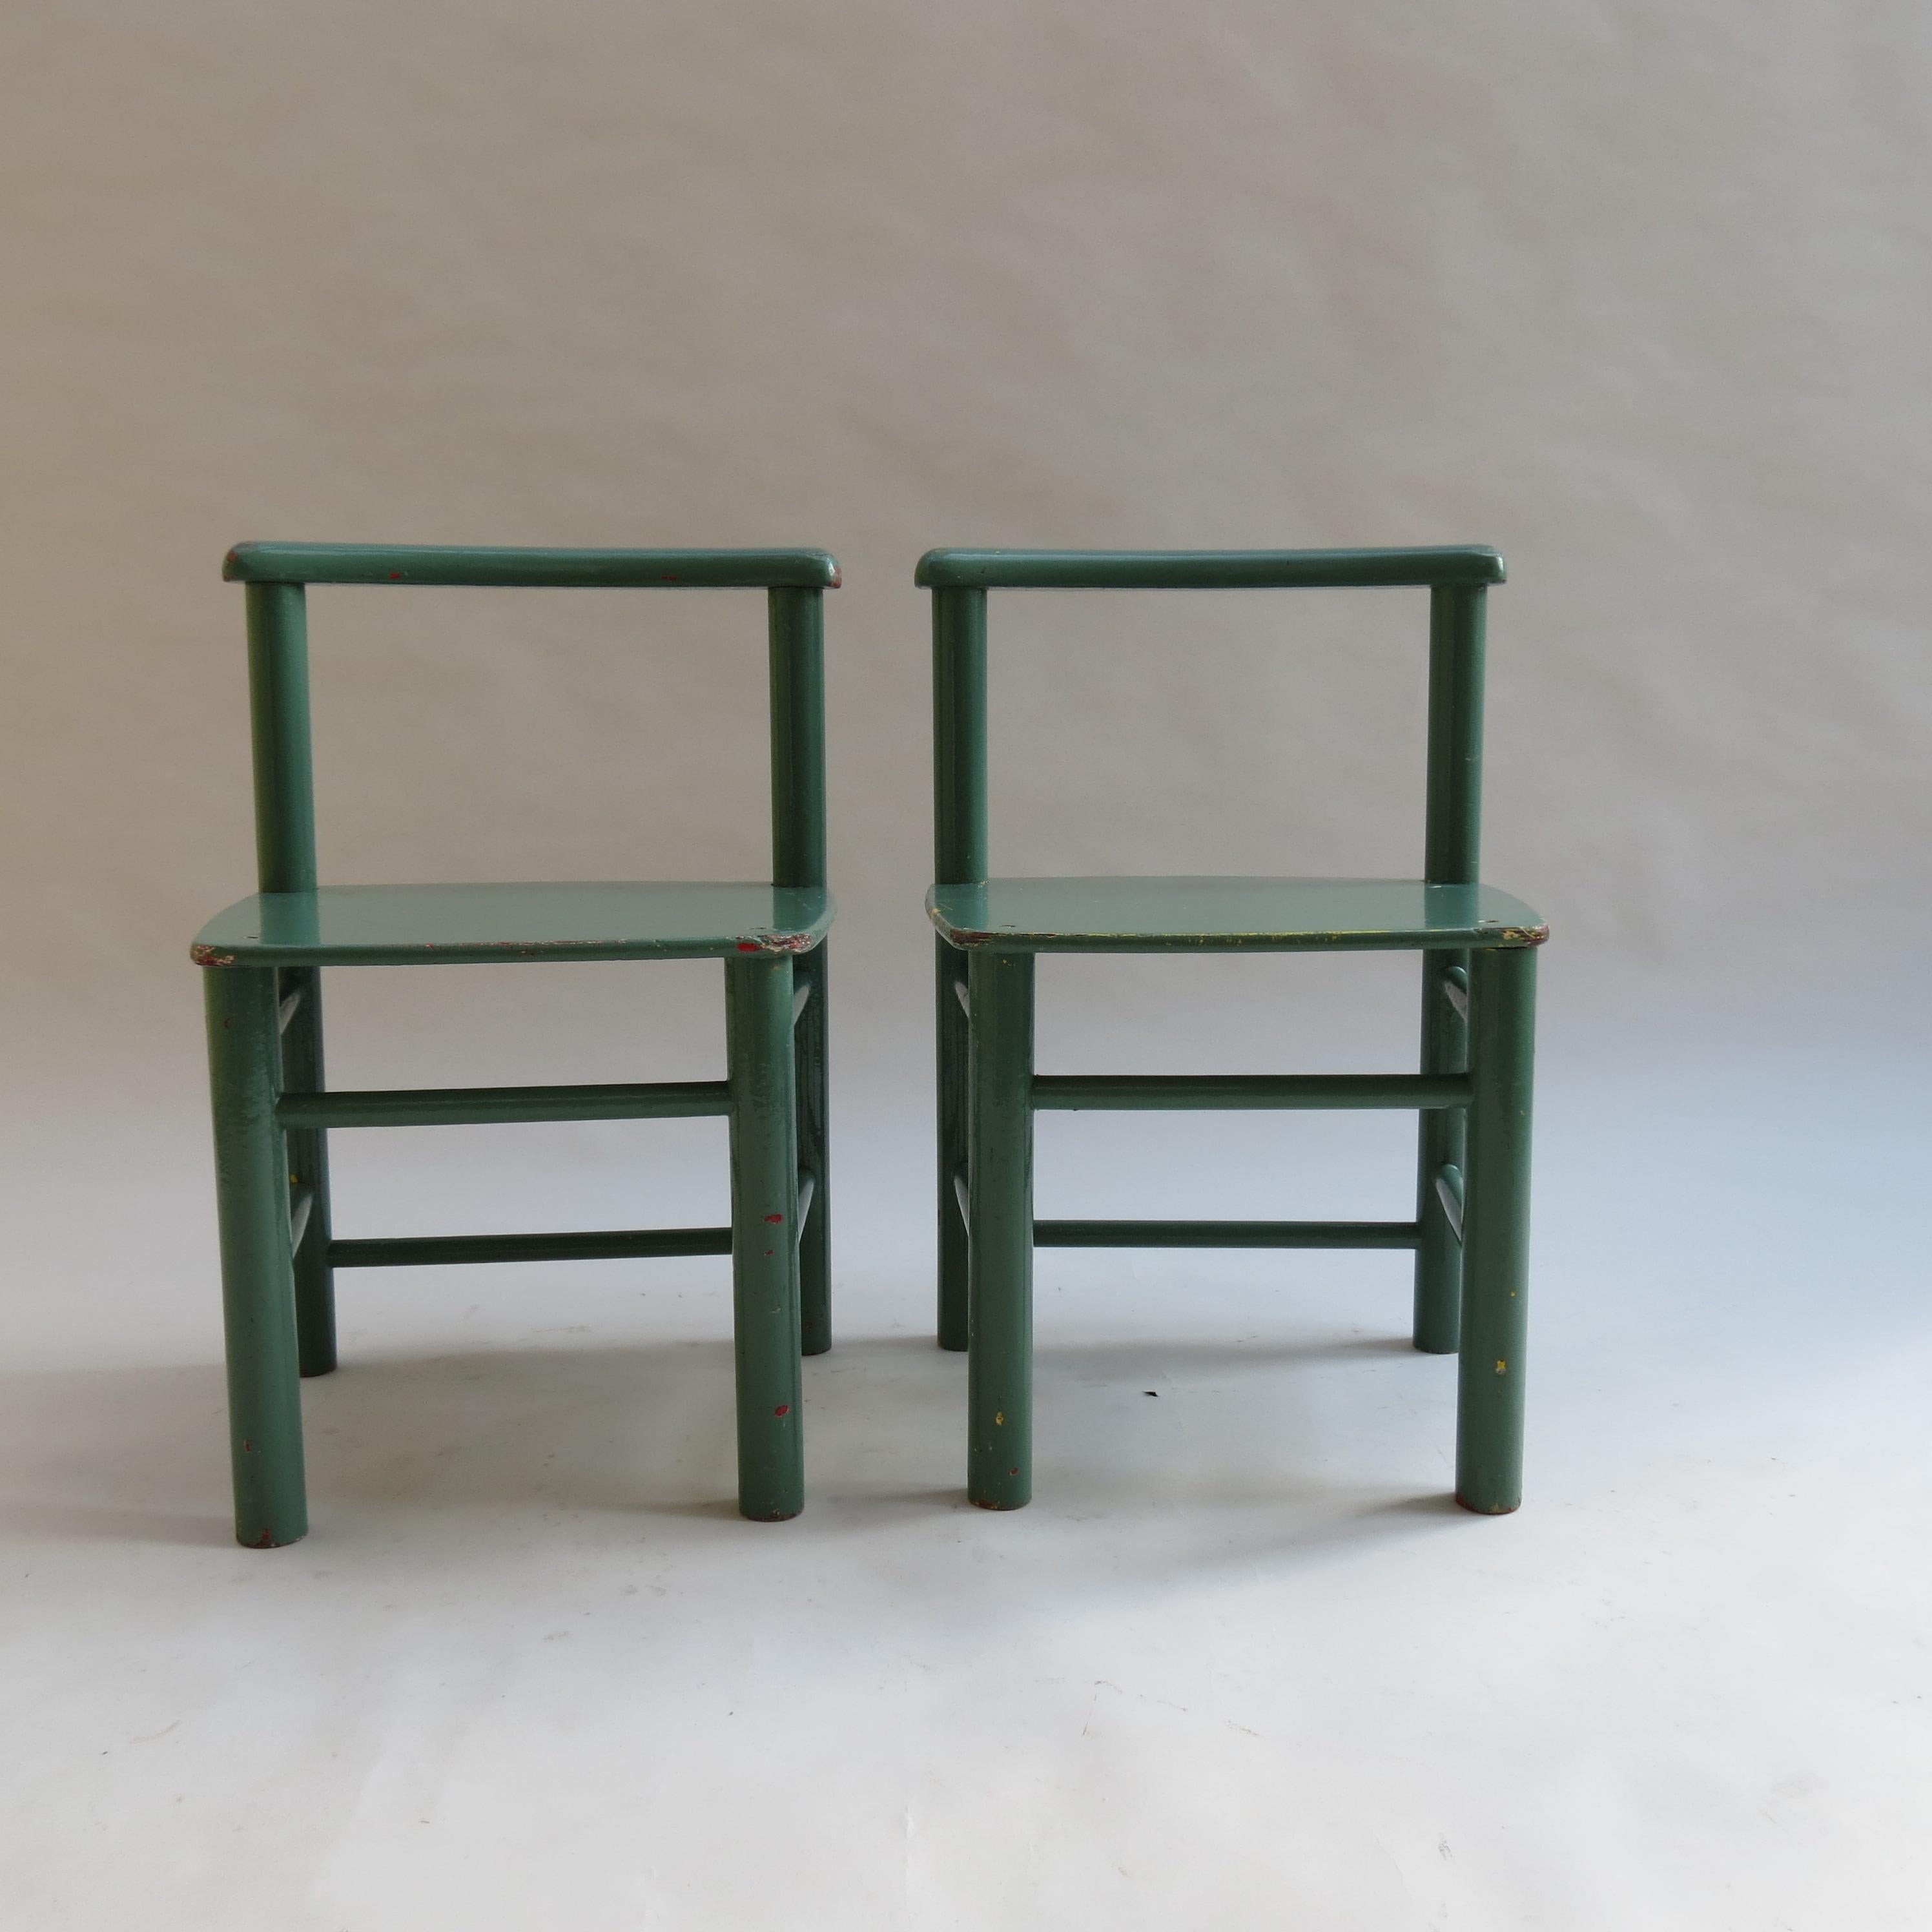 Machine-Made Pair of Scandinavian Childs Chairs in Green from the 1960s